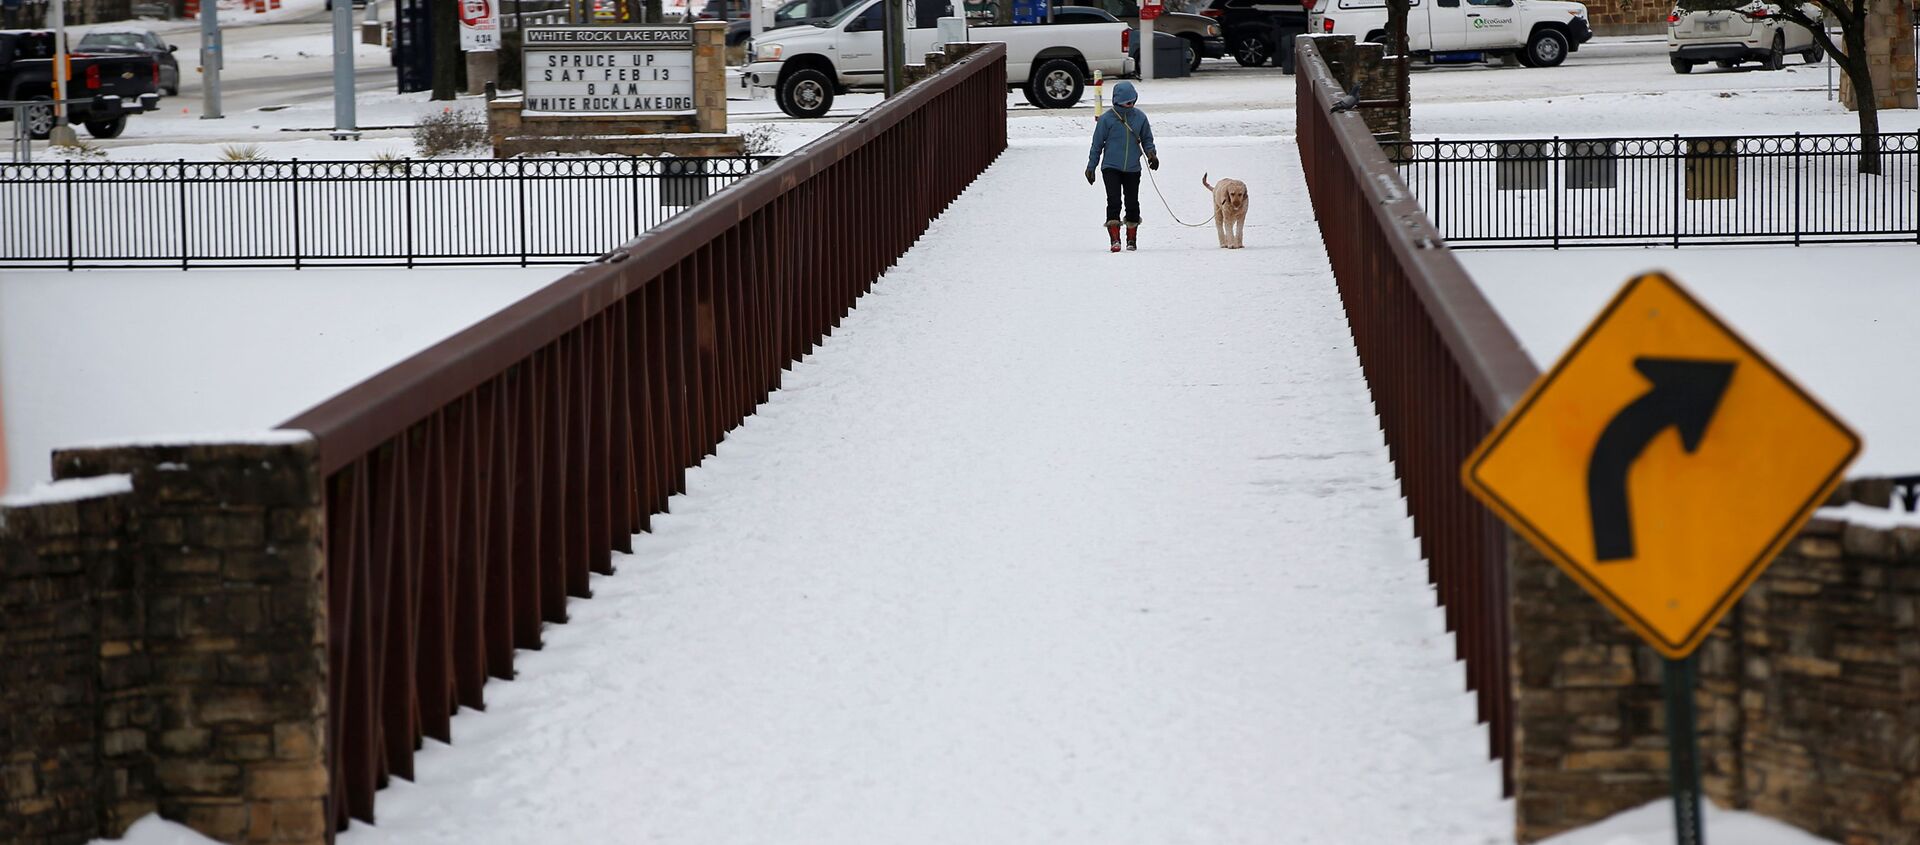 Anna Thomasson walks her dog, Penny, across the White Rock Lake Spillway after winter weather caused electricity blackouts in Dallas - Sputnik International, 1920, 19.02.2021